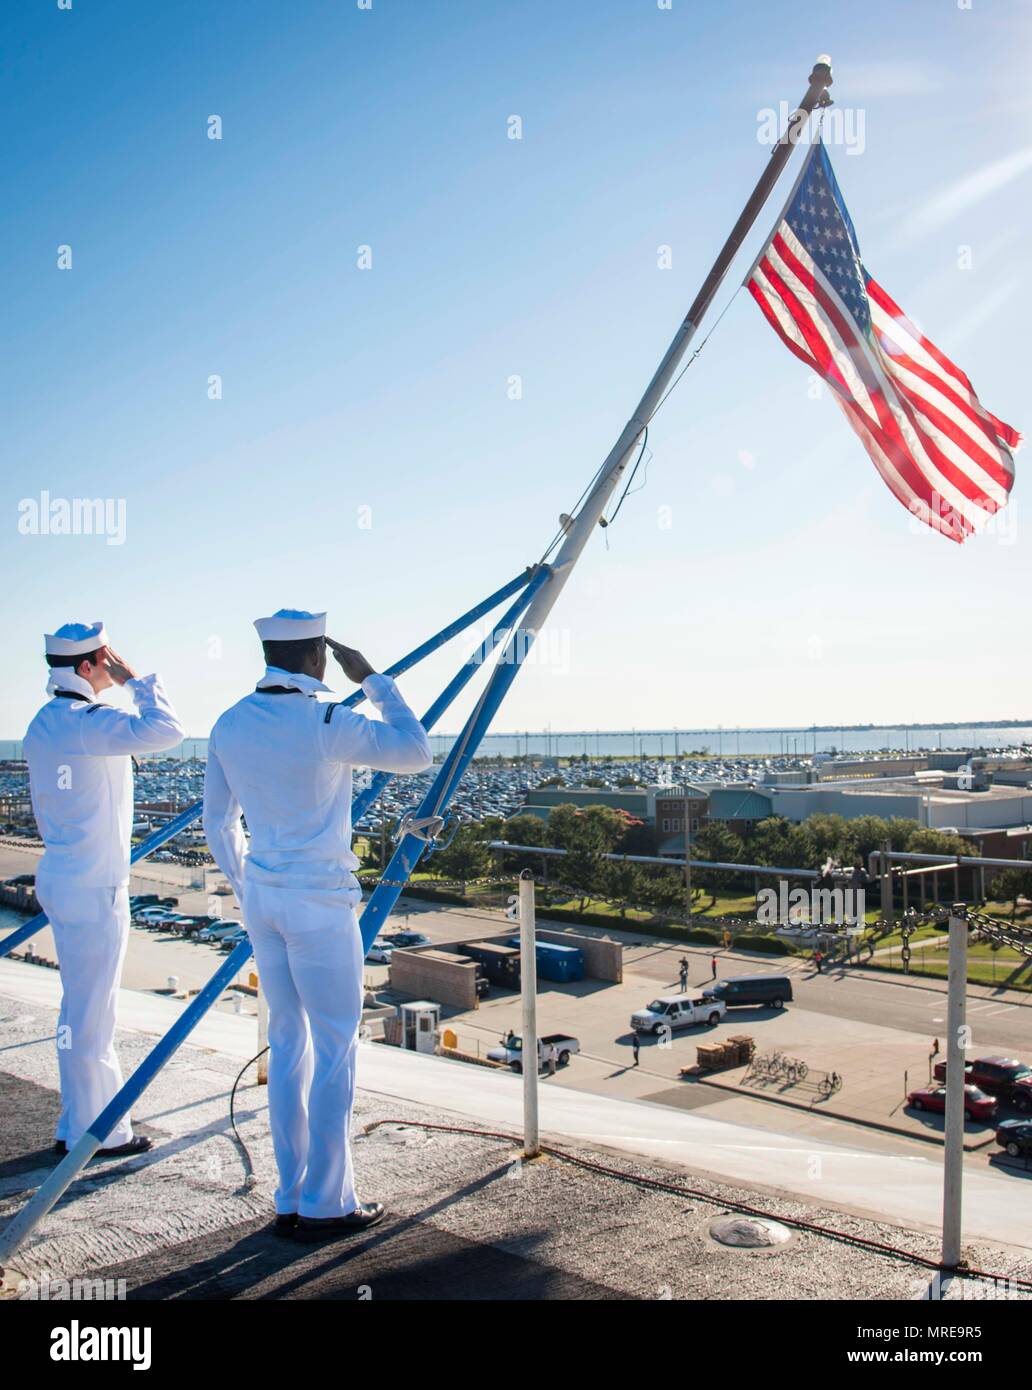 170609-N-FG807-050    NORFOLK, Va. (June 9, 2017)  Aviation Ordnanceman Airman Stephen Jackson, from Auburn, Ala., left, and Aviation Ordnanceman 3rd Class Cyle West, from Great Lakes, salute the ensign during morning colors aboard the aircraft carrier USS Dwight D. Eisenhower (CVN 69) (Ike). Ike is currently pier side during the sustainment phase of the Optimized Fleet Response Plan (OFRP). (U.S. Navy photo by Mass Communication Specialist Seaman Devin A. Lowe) Stock Photo